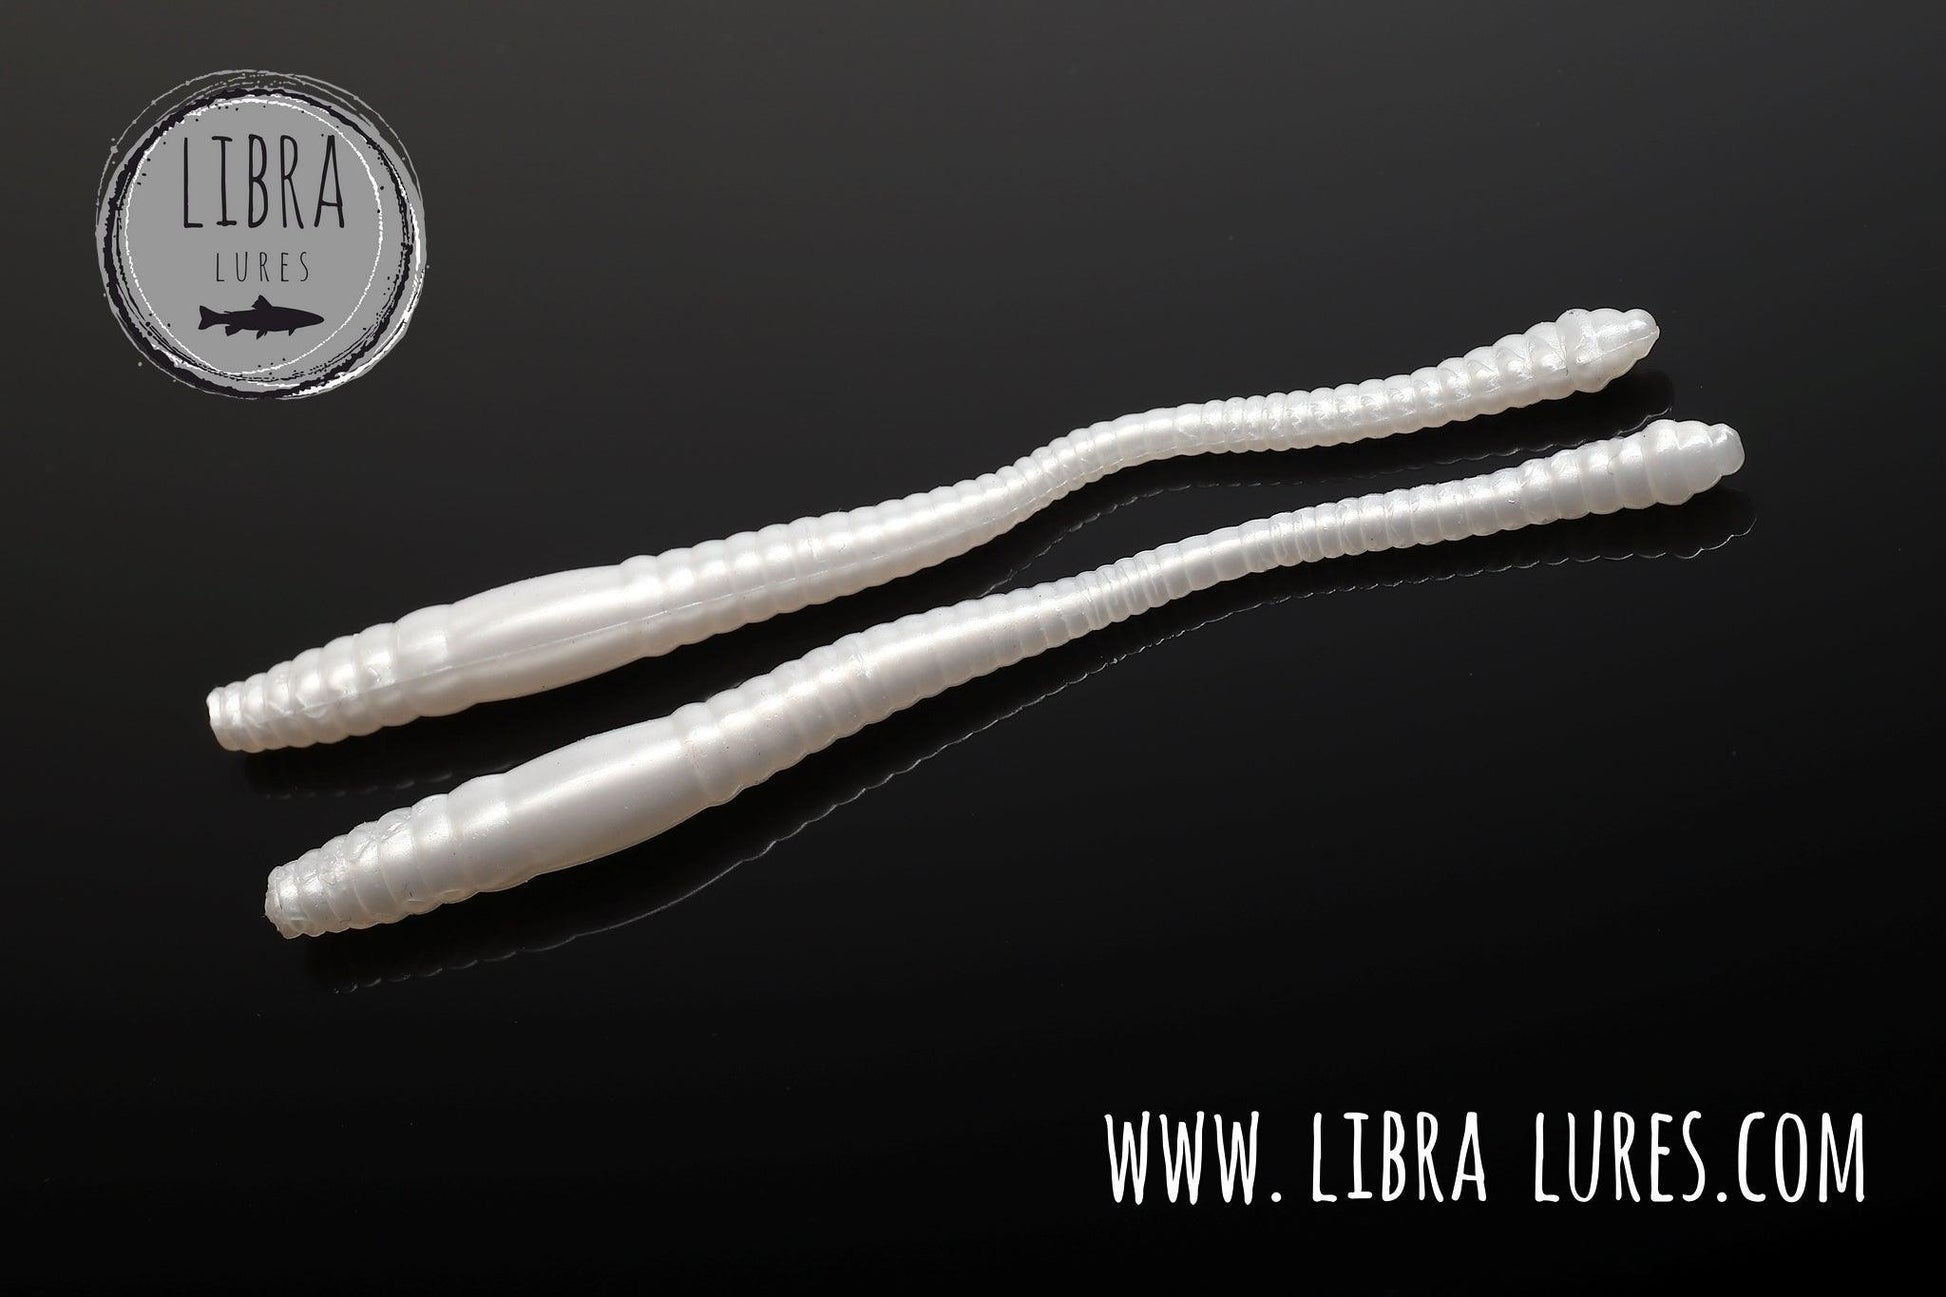 LIBRA LURES DYING WORM 70mm Aroma Käse - SP-Fishing